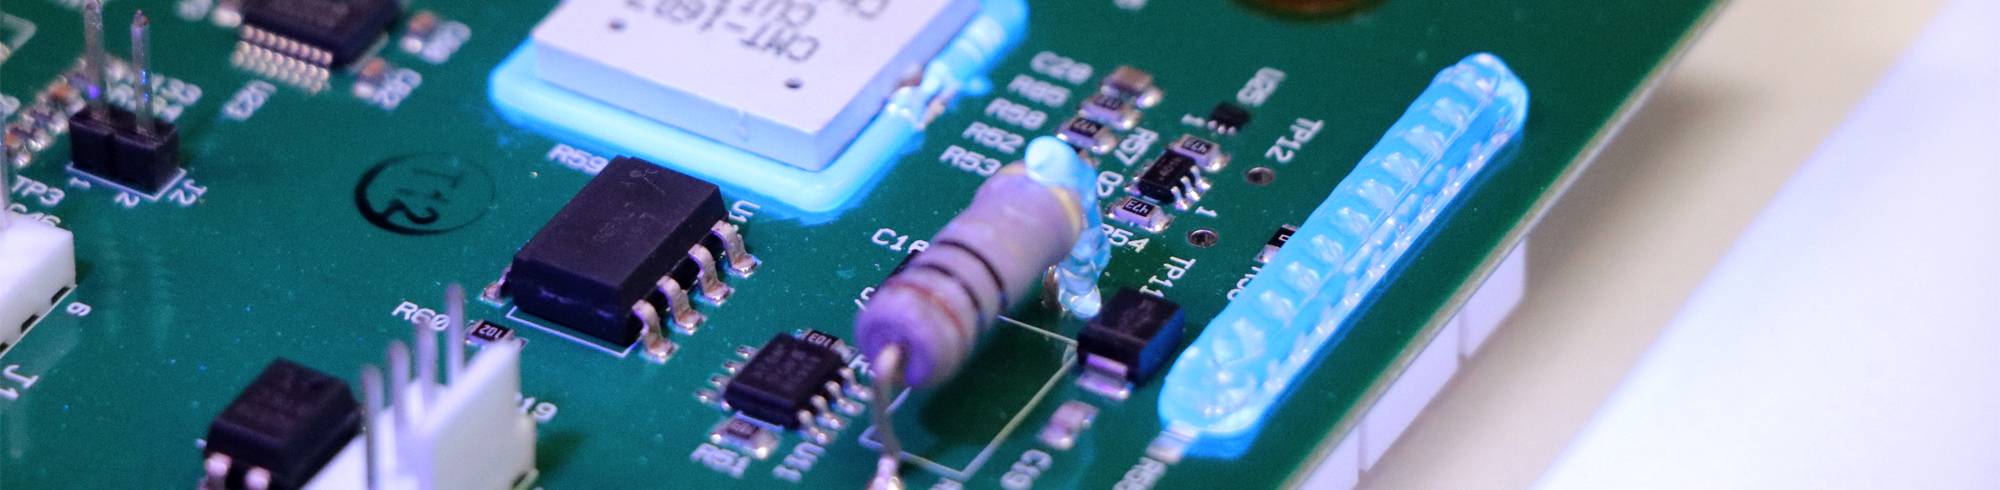 LED-Curable Encapsulants for Microelectronic Component Protection